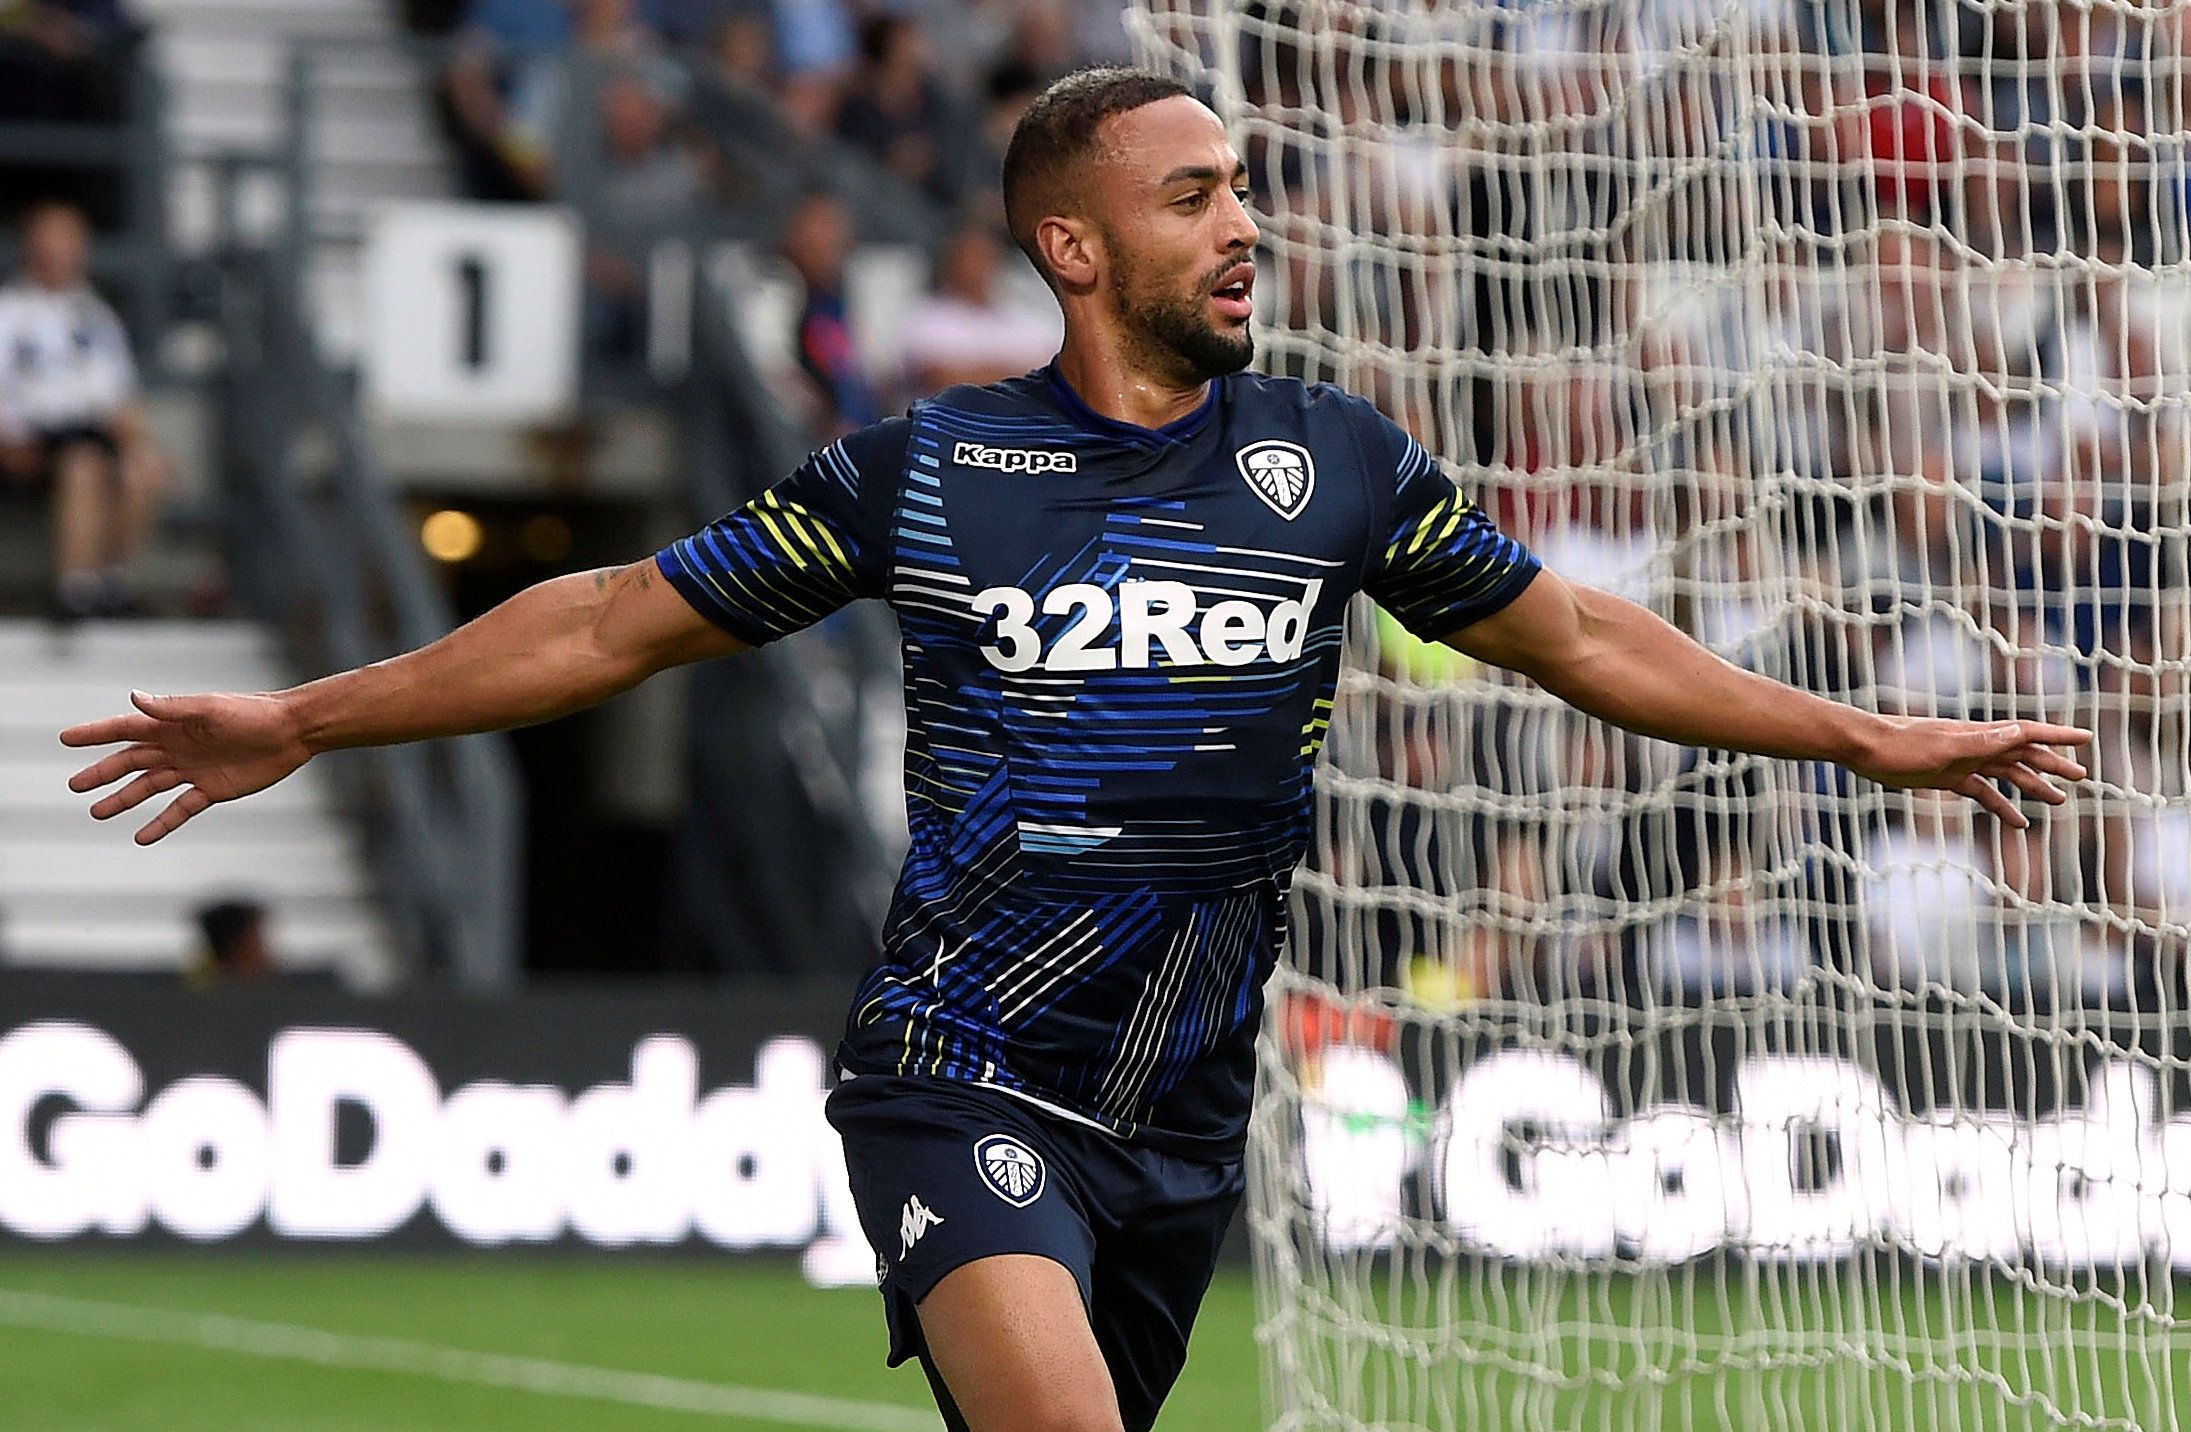 Soccer Football - Championship - Derby County v Leeds United - Pride Park, Derby, Britain - August 11, 2018   Leeds' Kemar Roofe celebrates scoring their second goal   Action Images/Alan Walter    EDITORIAL USE ONLY. No use with unauthorized audio, video, data, fixture lists, club/league logos or 